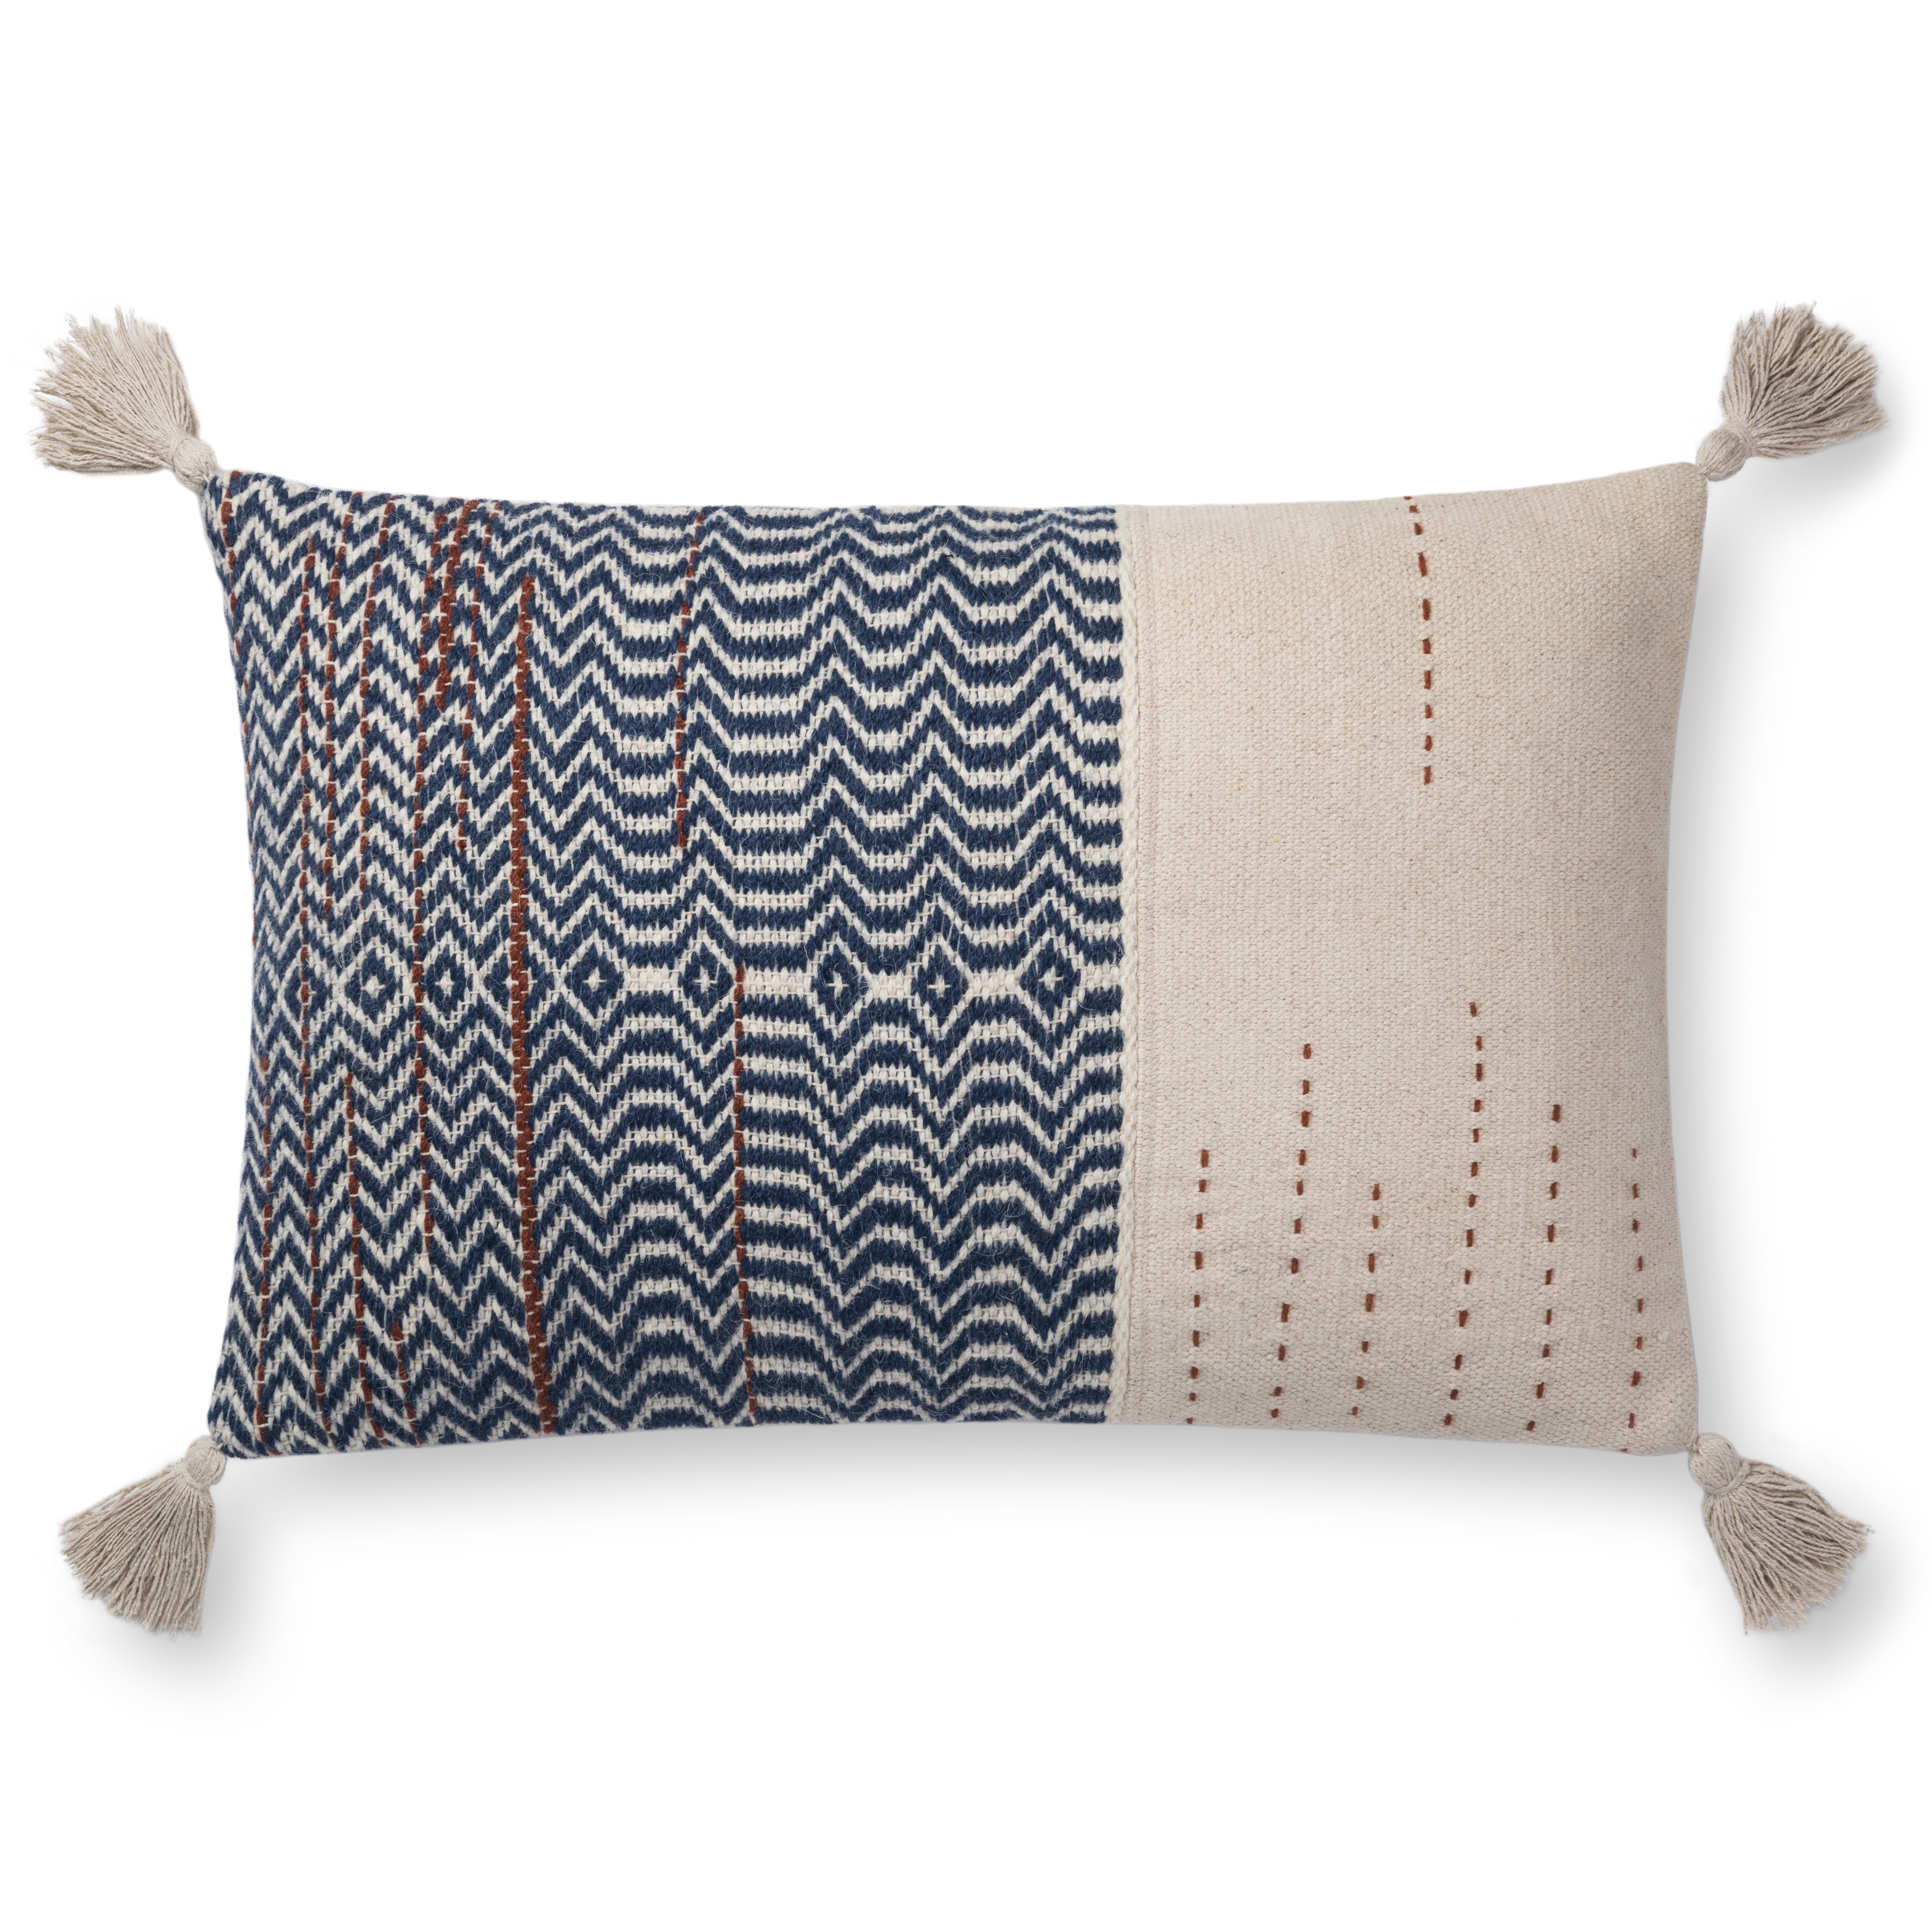 Magnolia Home by Joanna Gaines PILLOWS P1086 IVORY / INDIGO 16" x 26" Cover Only - Image 1